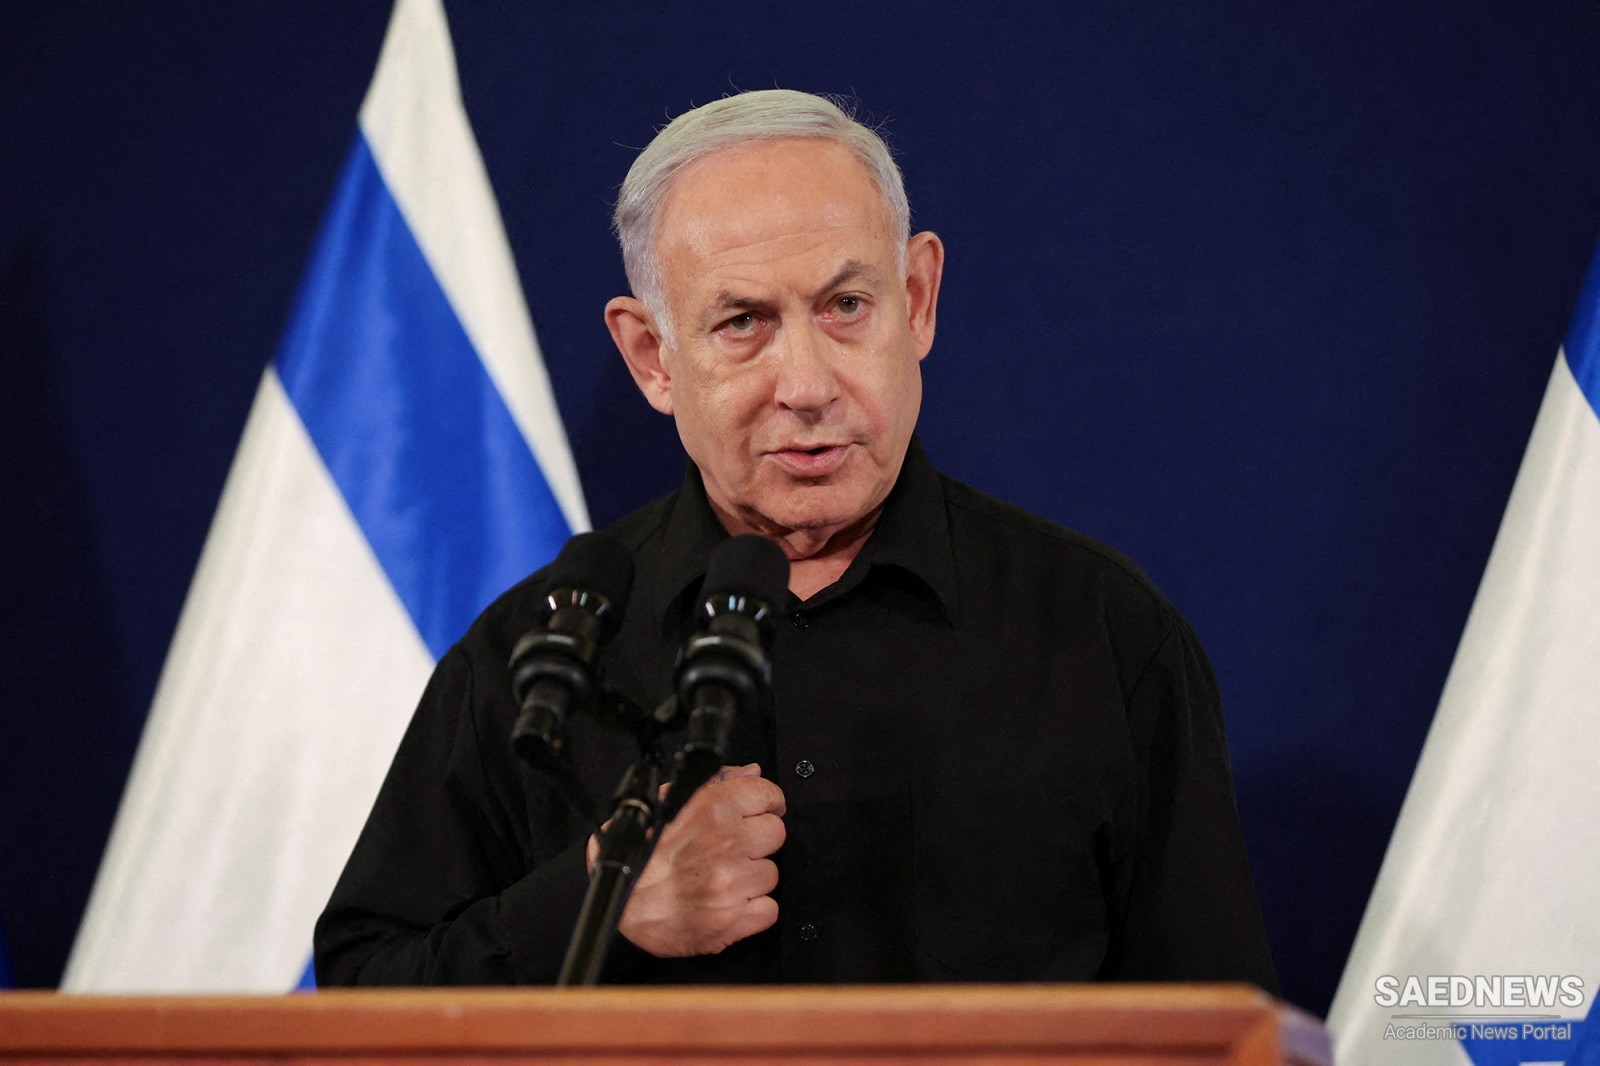 Netanyahu: Israel will have "overall security responsibility" for Gaza for "indefinite period" after war ends